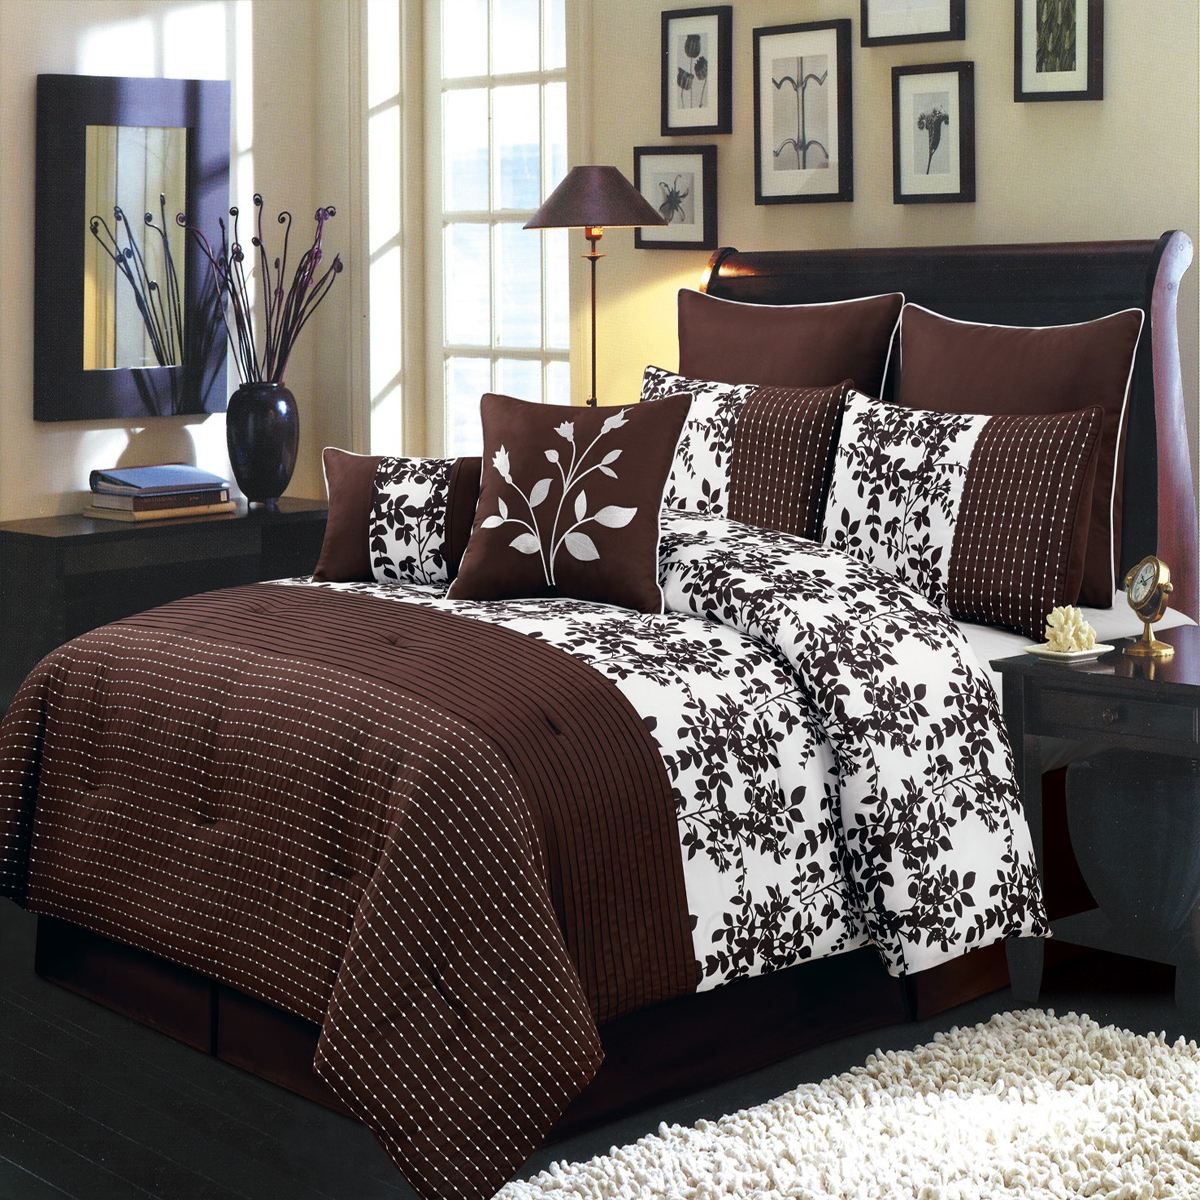 GoLinens Luxury Bliss 100% Polyester Chocolate and White Shades 8 PC Comforter set